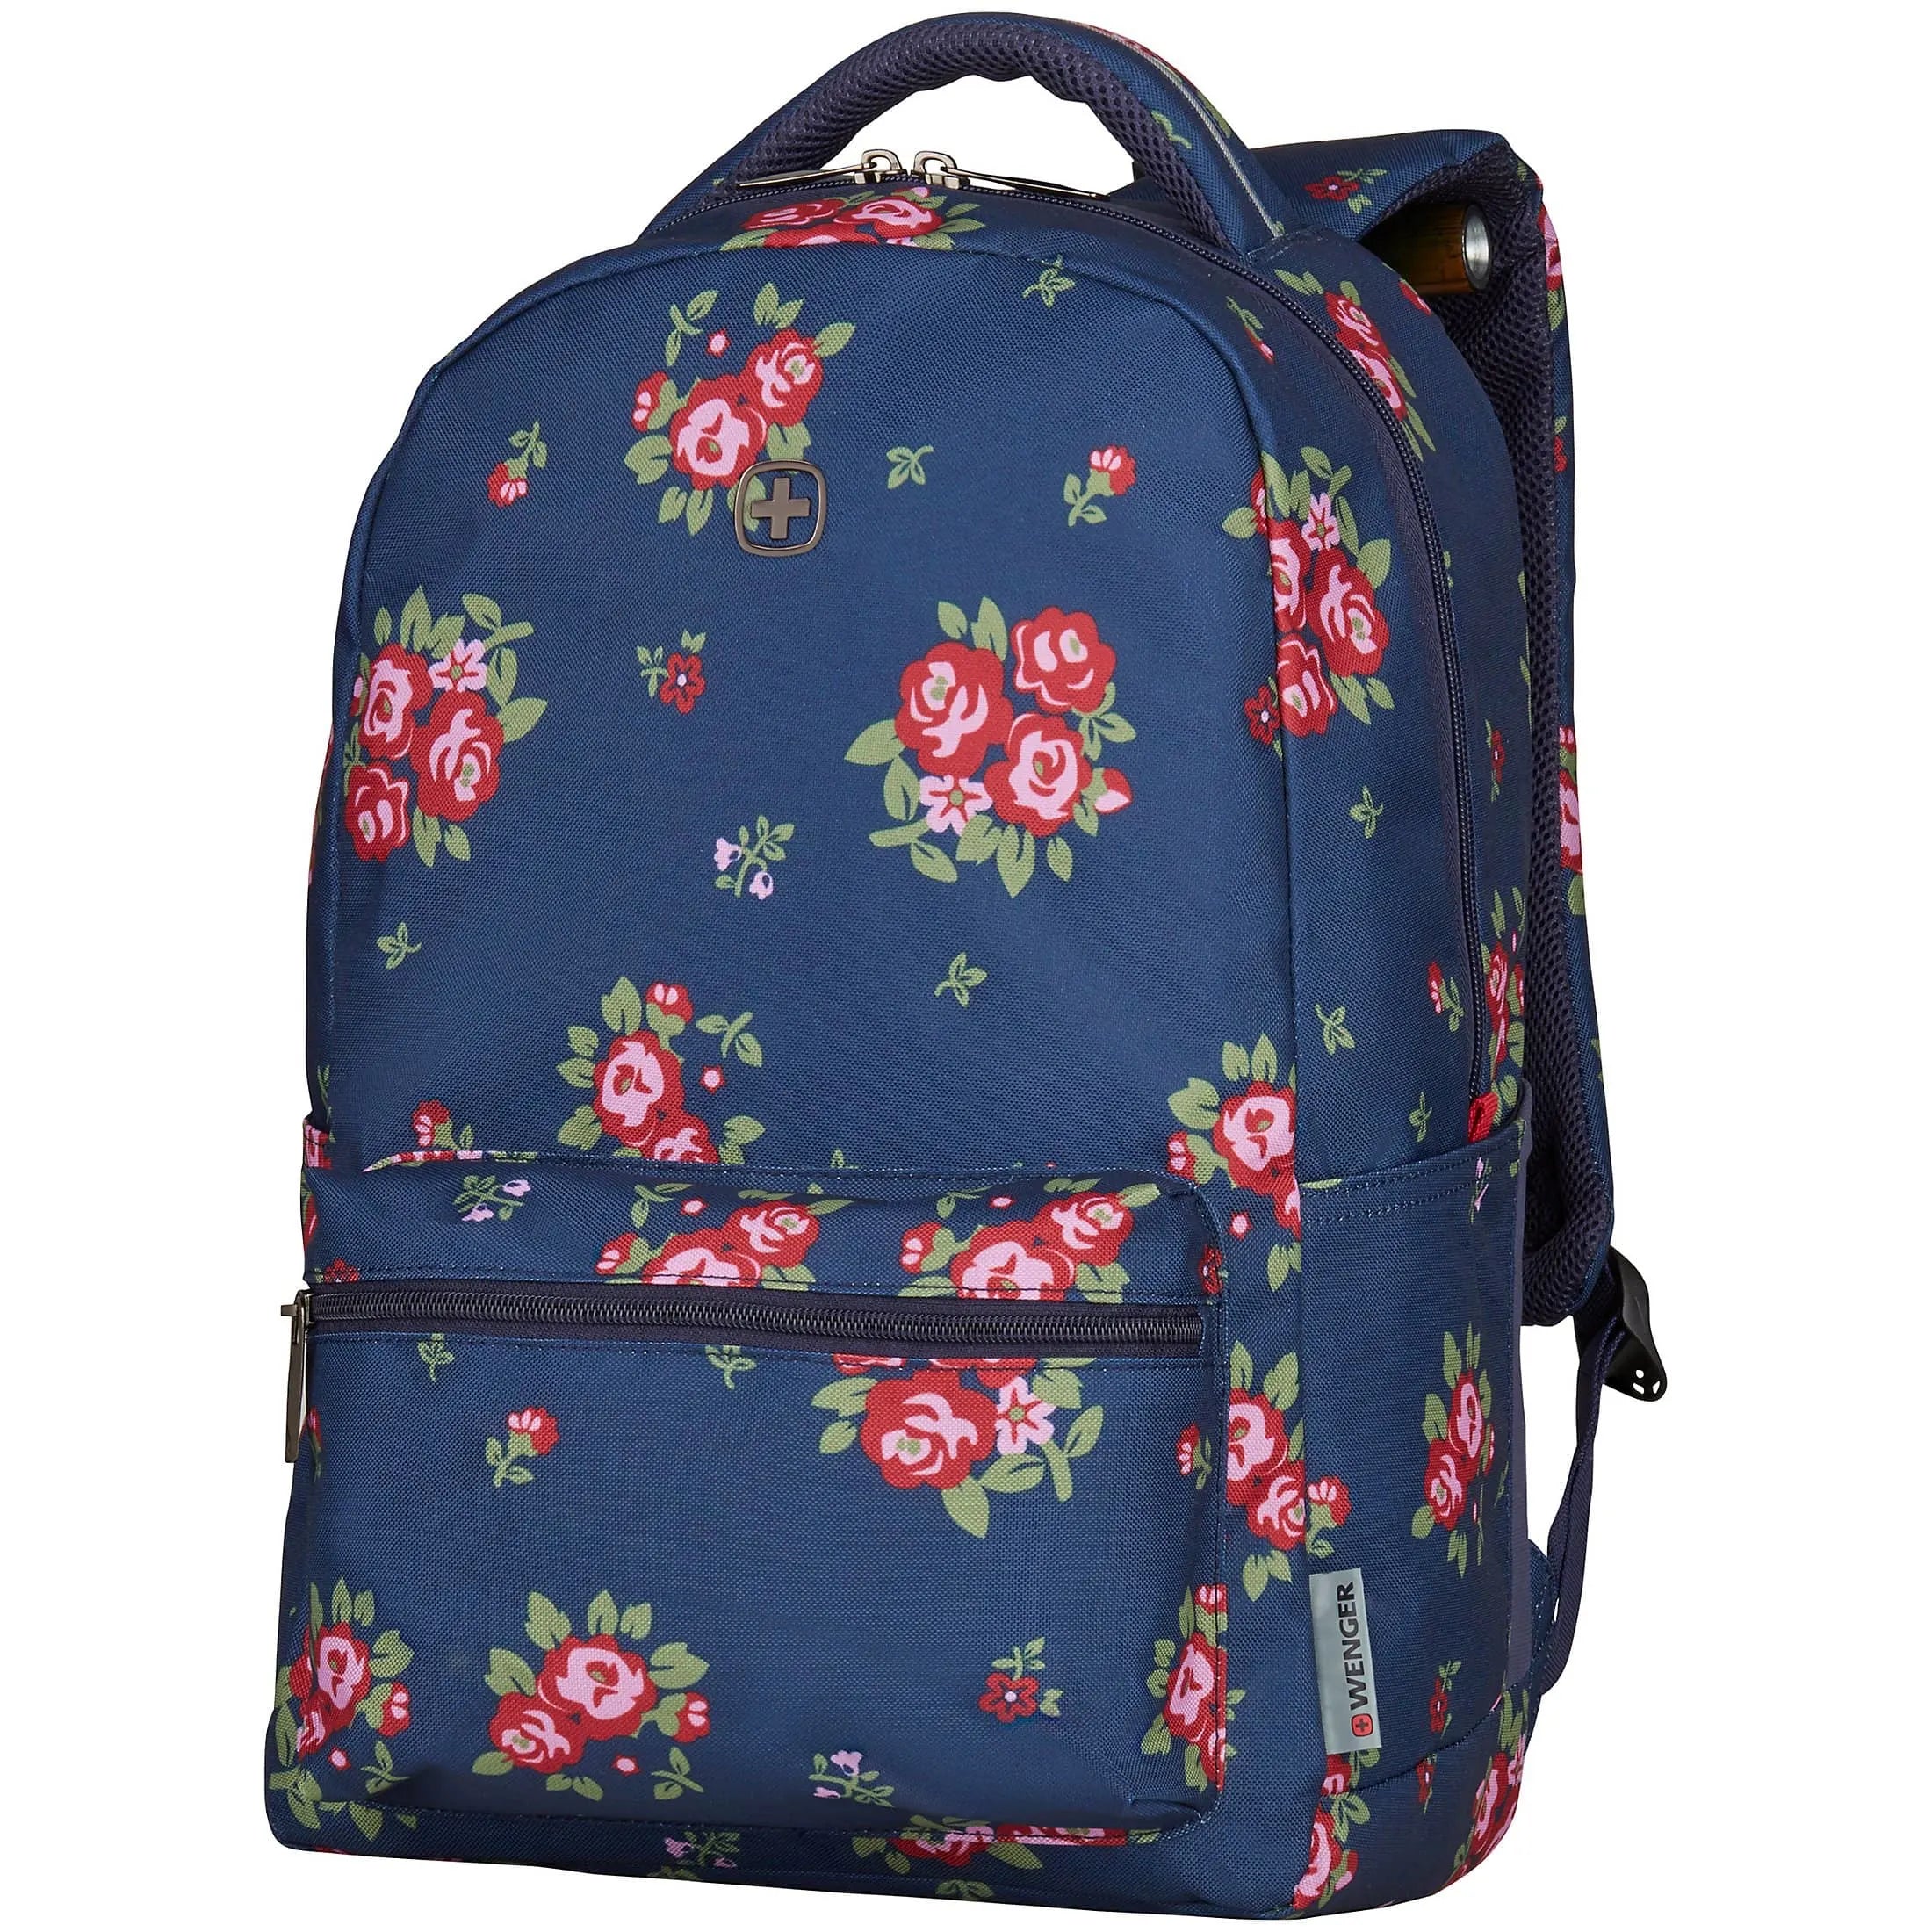 Wenger Business Colleague Laptop Backpack 16 inch 45 cm - Navy Floral Print